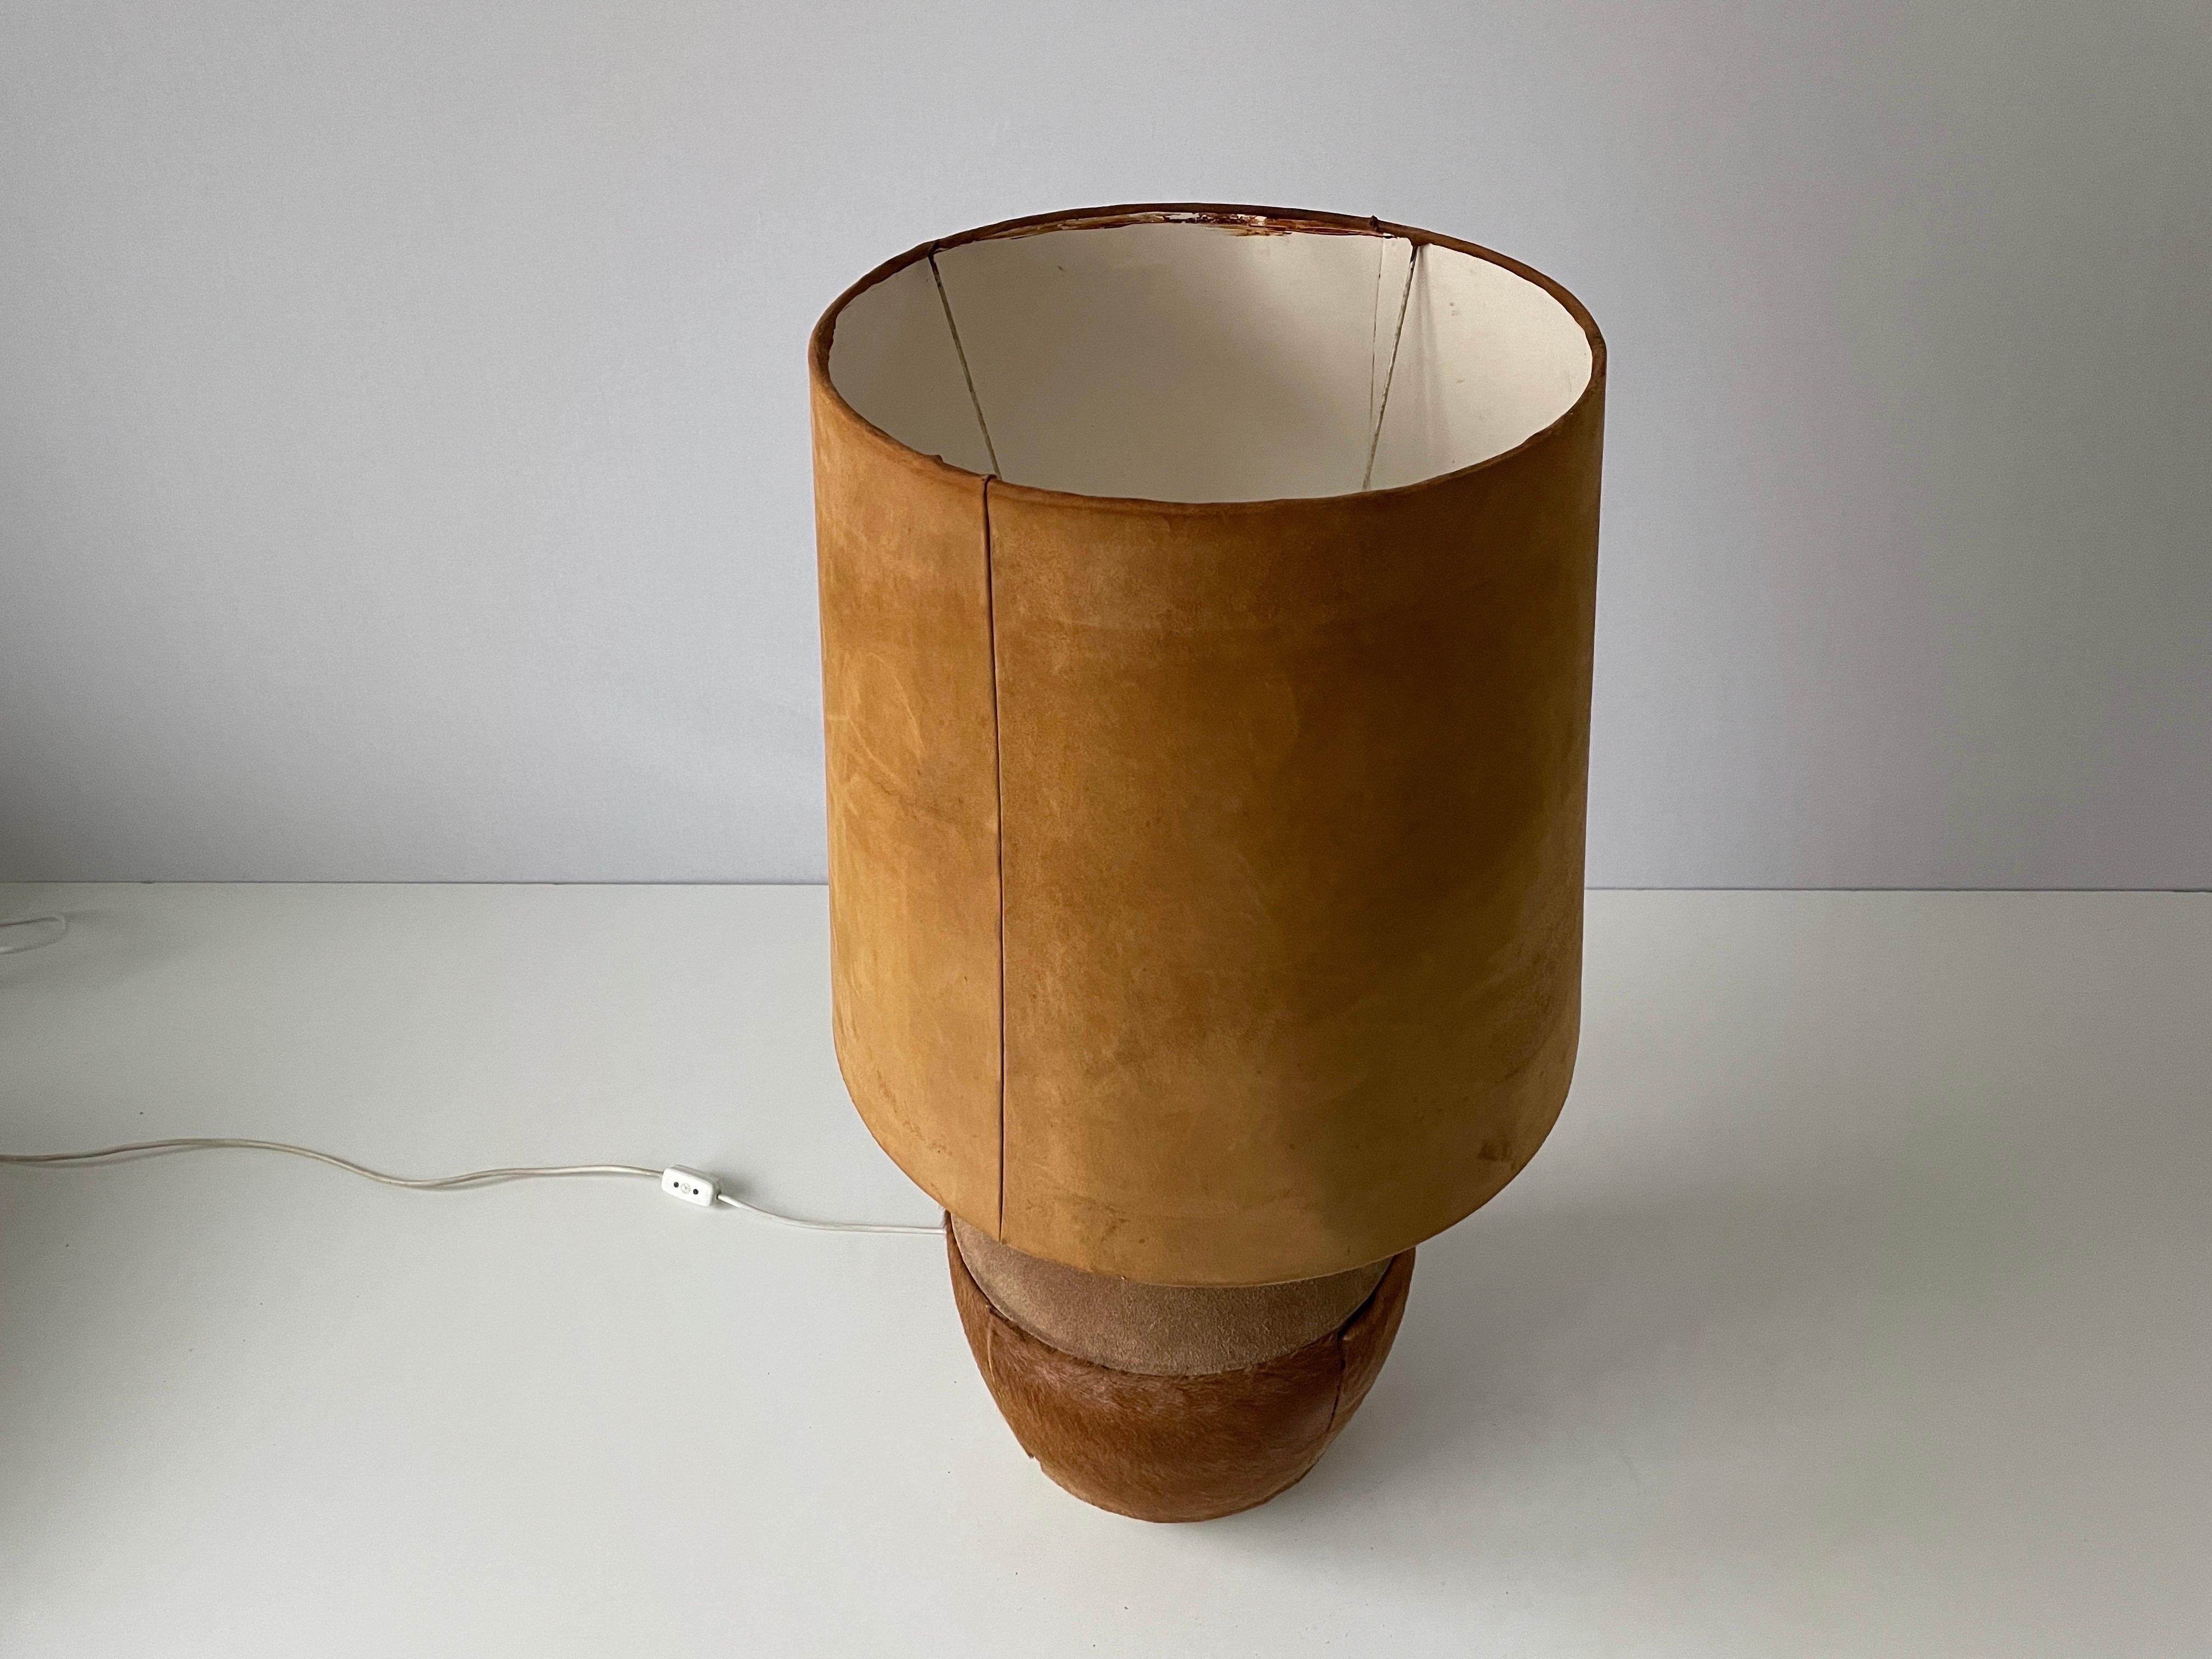 Mid-Century Modern Tan Suede Leather and Glass Shade Floor or Table Lamp, 1960s, Denmark For Sale